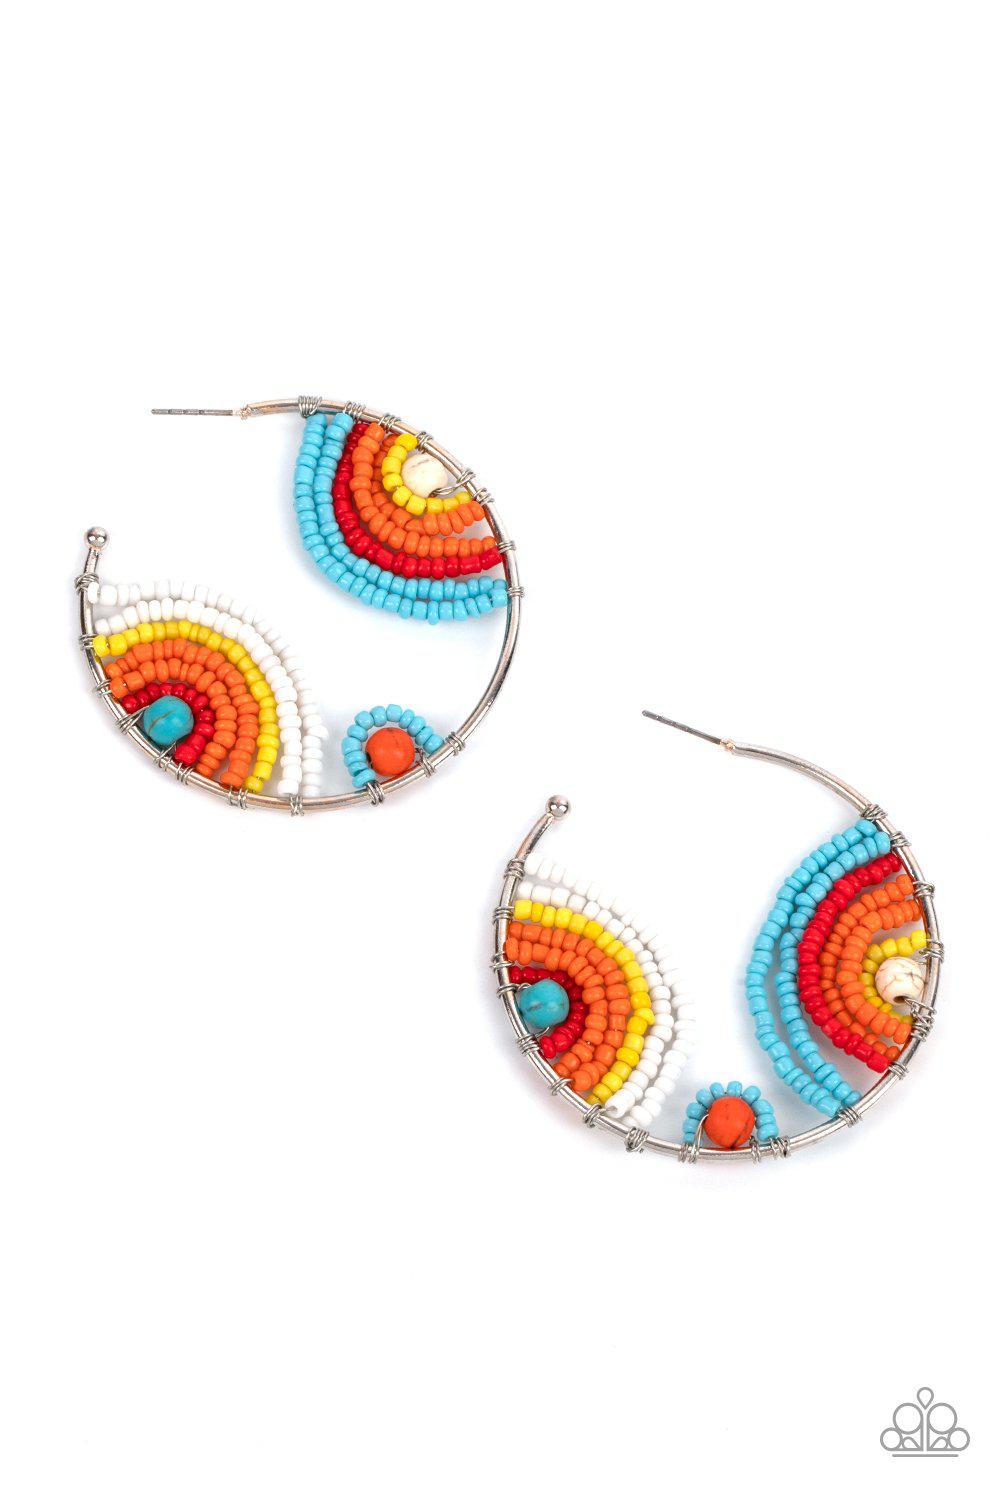 Rainbow Horizons Multi Seed Bead and Stone Hoop Earrings - Paparazzi Accessories LOTP Exclusive July 2021- lightbox - CarasShop.com - $5 Jewelry by Cara Jewels